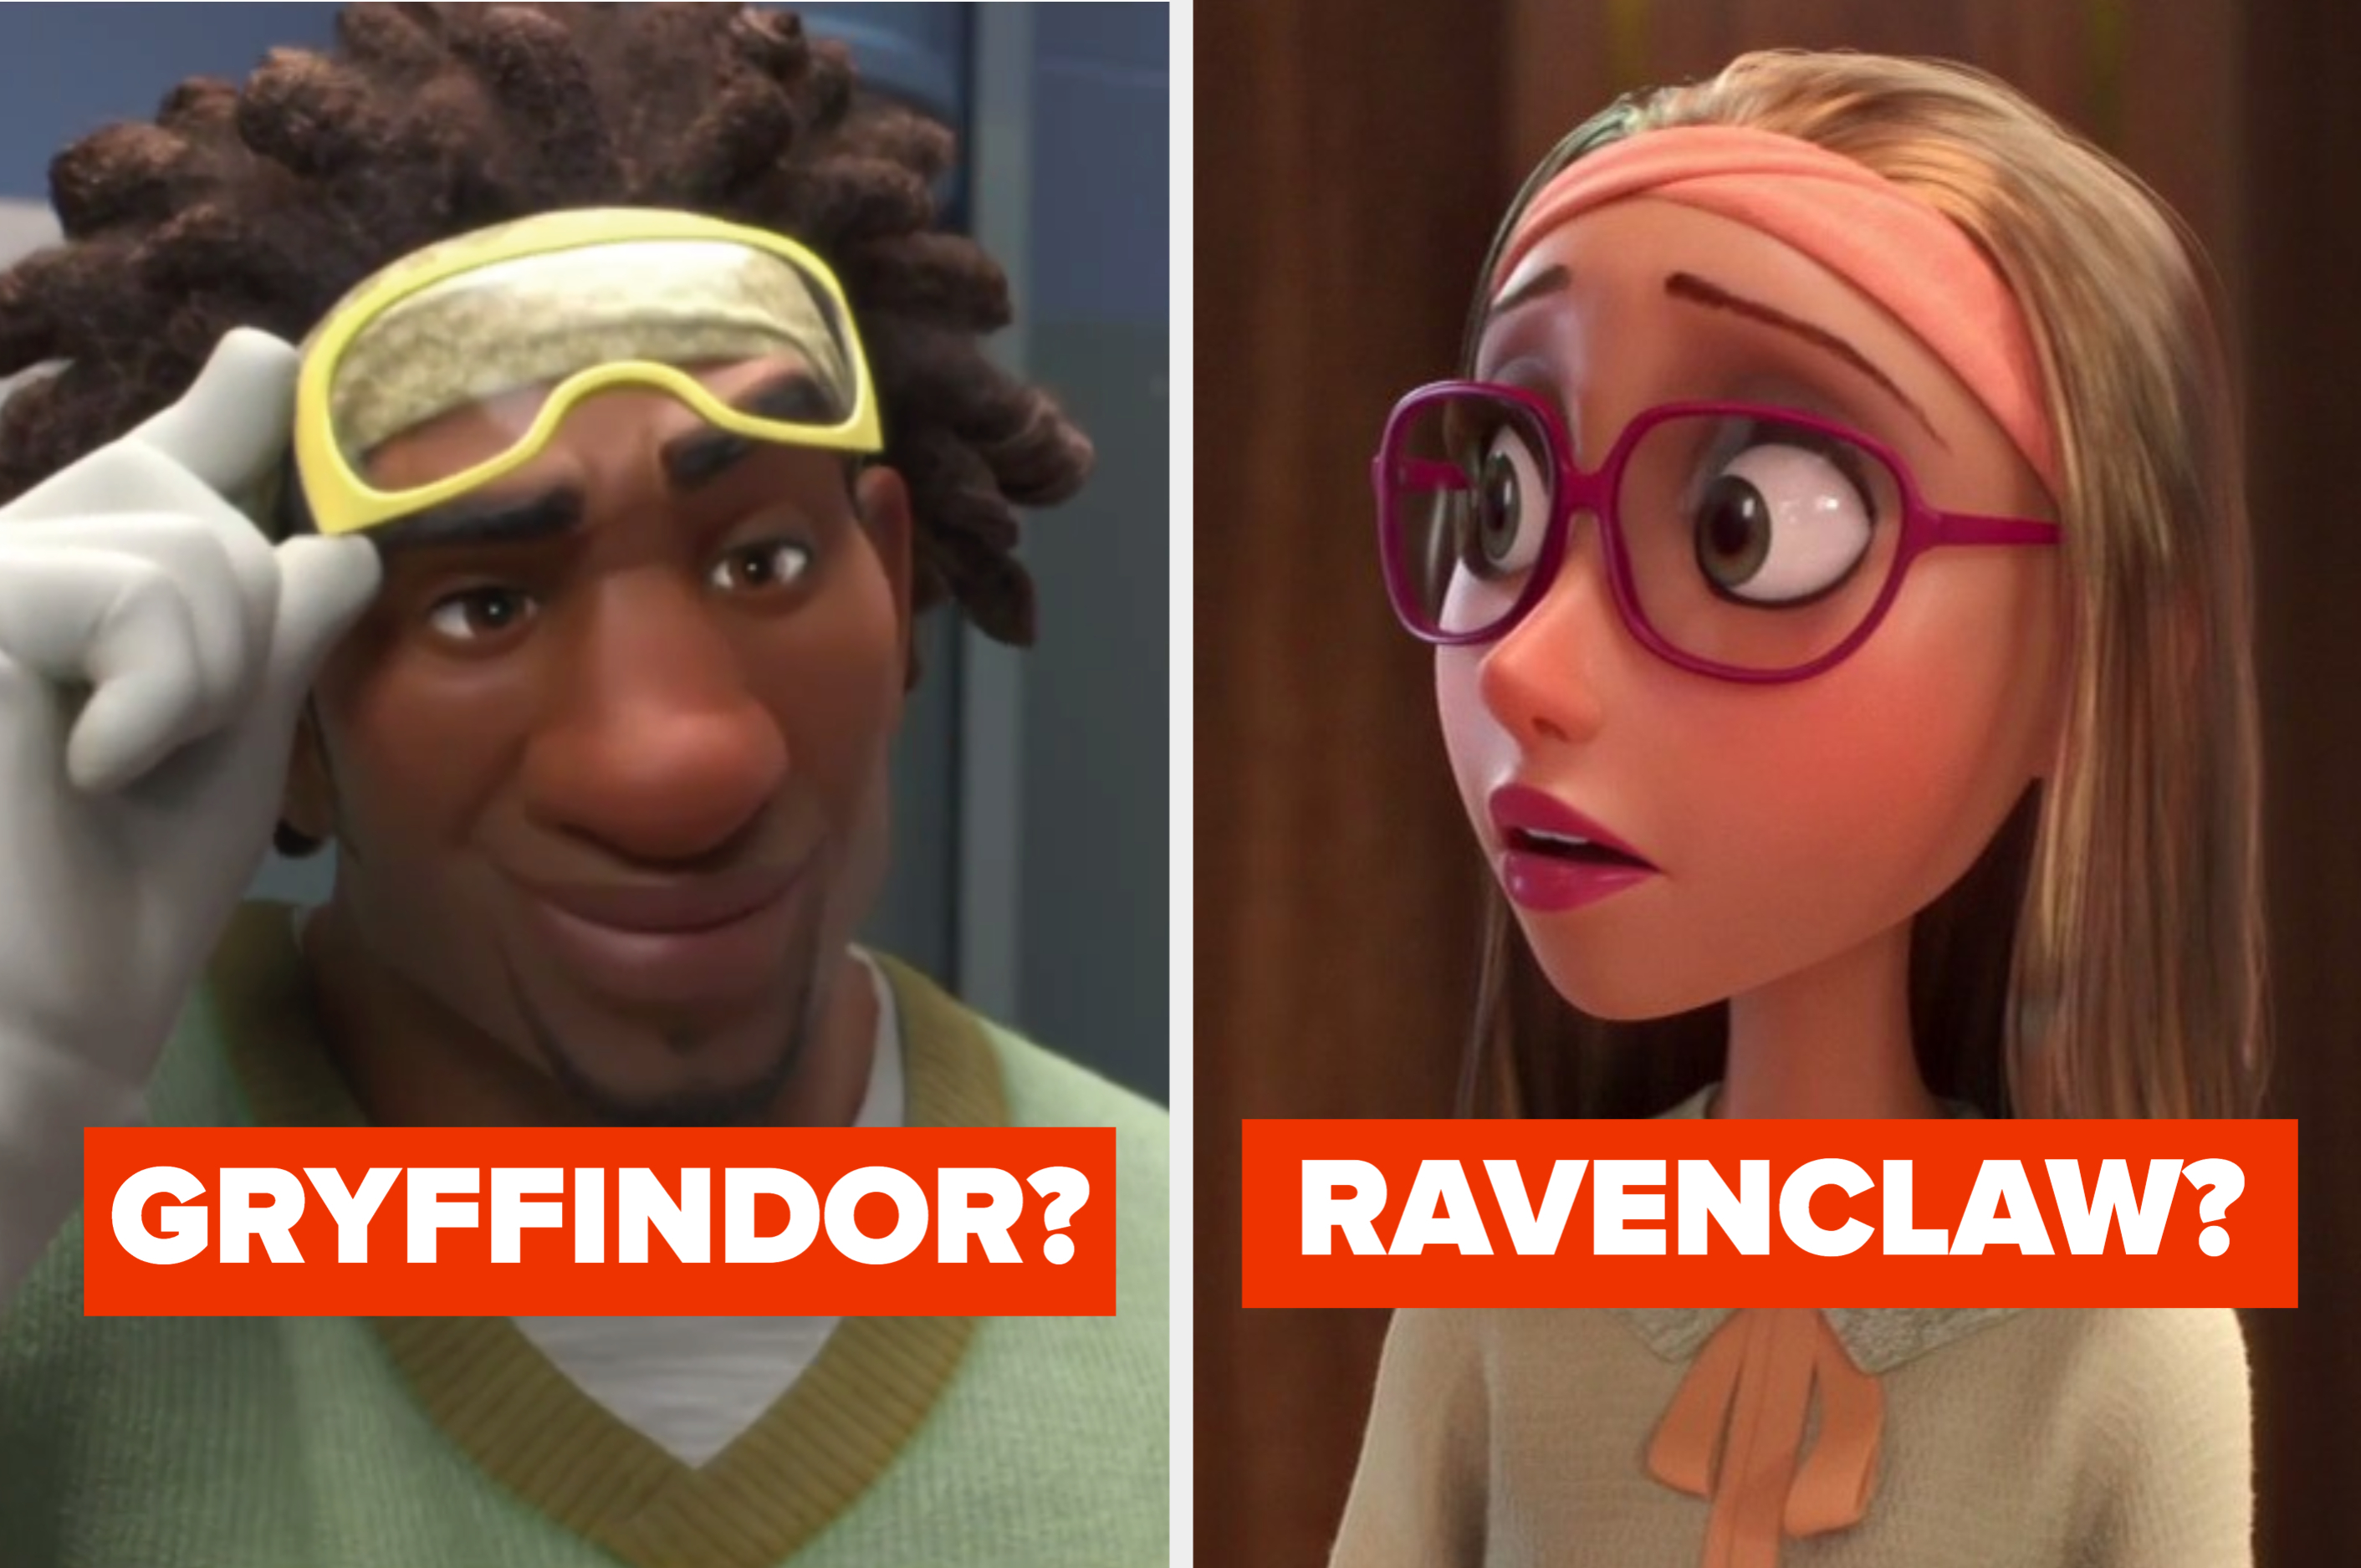 It's Time To Sort These Big Hero 6 Characters Into The Correct